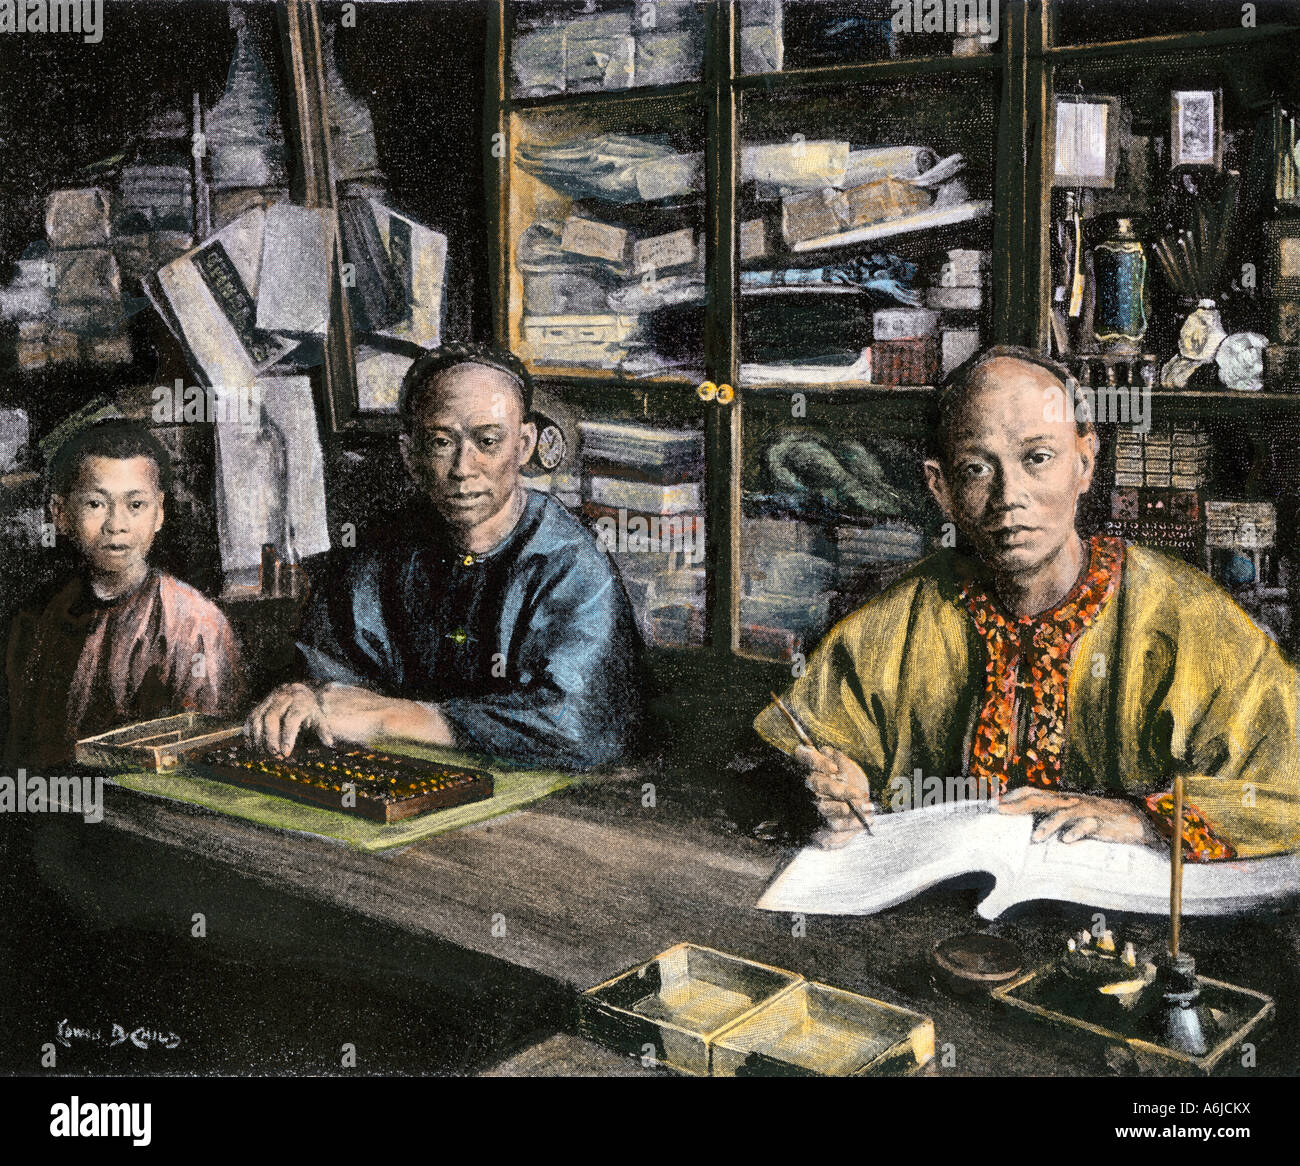 Chinese merchant and accountants in California circa 1890. Hand-colored halftone of an illustration Stock Photo